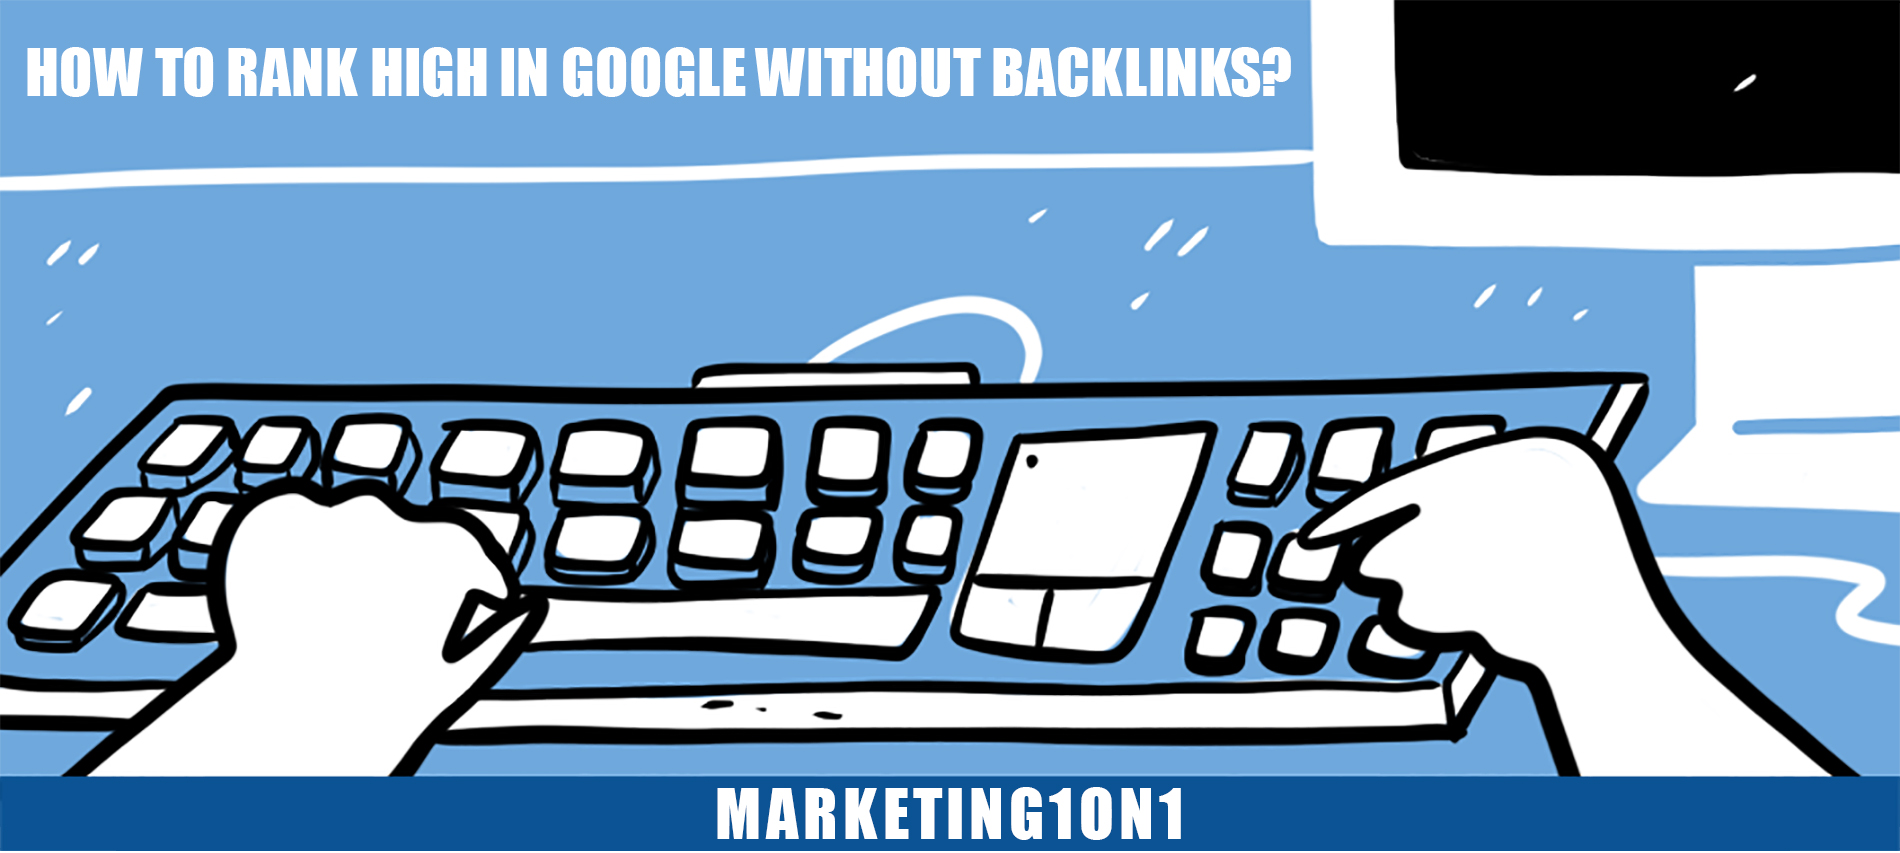 How to rank high in Google without backlinks?